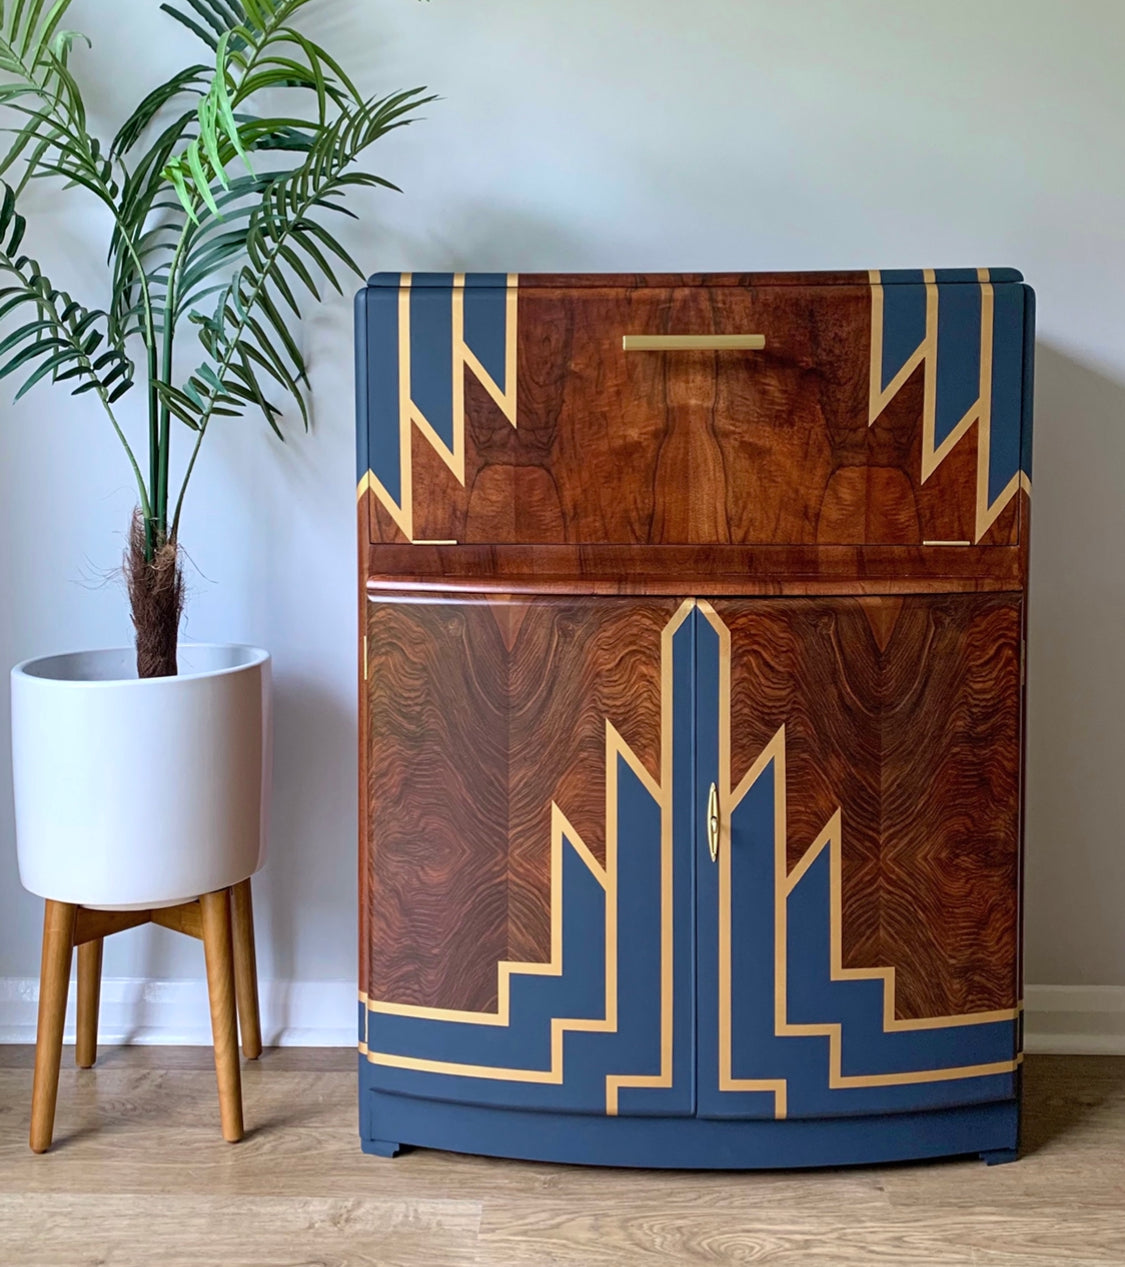 Vintage Walnut 1920s Art Deco Cocktail Cabinet - Bespoke Hand-Painted Design - Midnight Rising - Made to Order